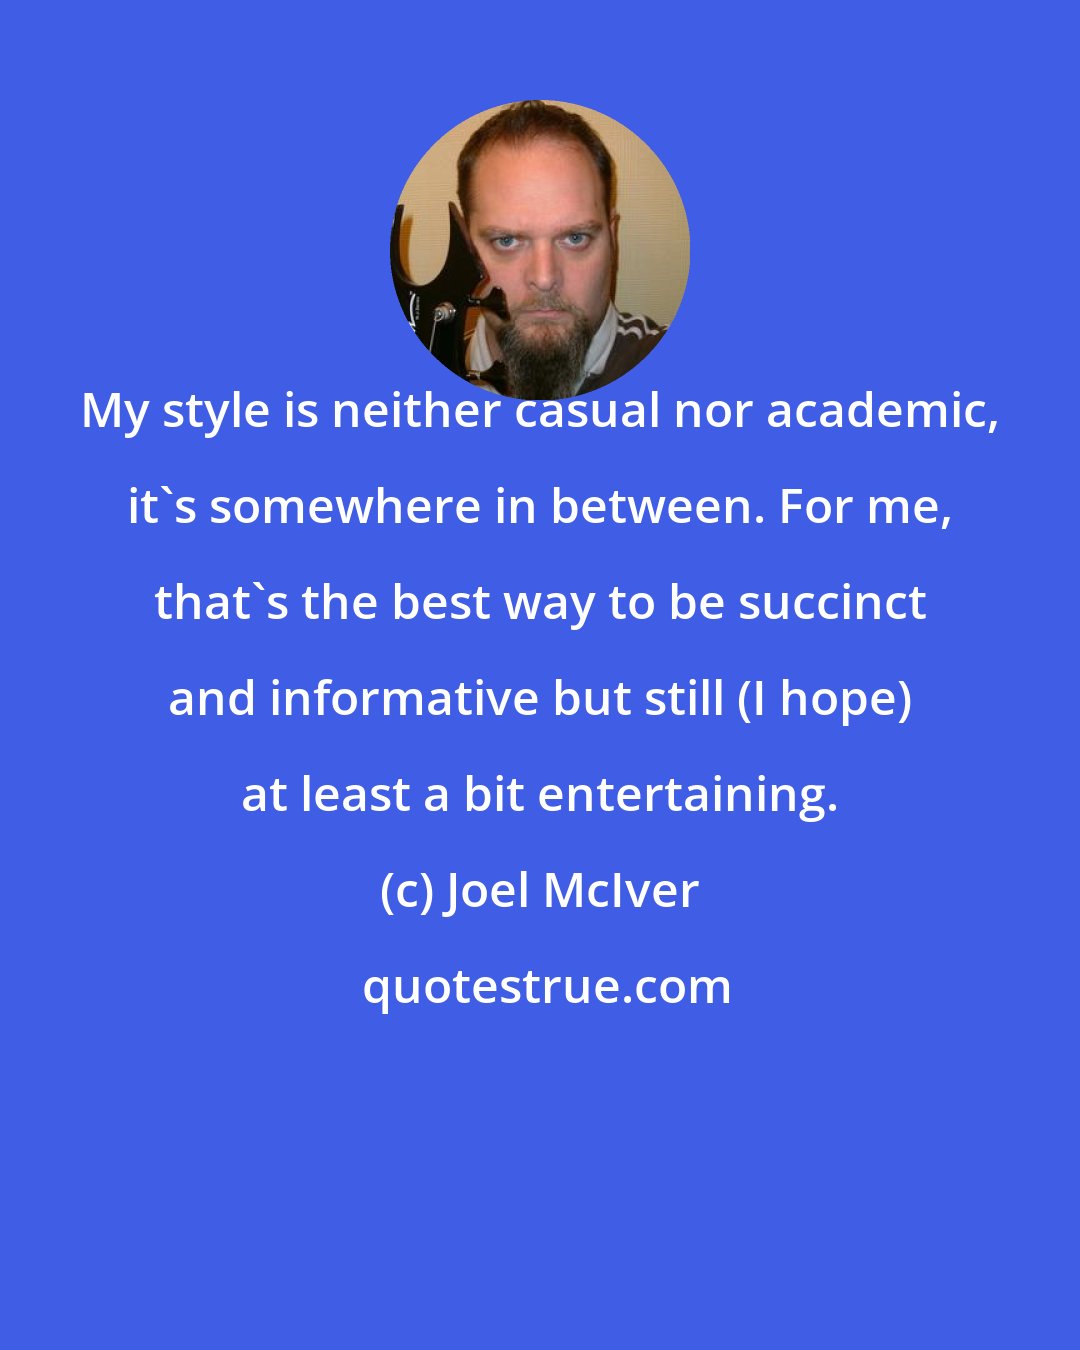 Joel McIver: My style is neither casual nor academic, it's somewhere in between. For me, that's the best way to be succinct and informative but still (I hope) at least a bit entertaining.